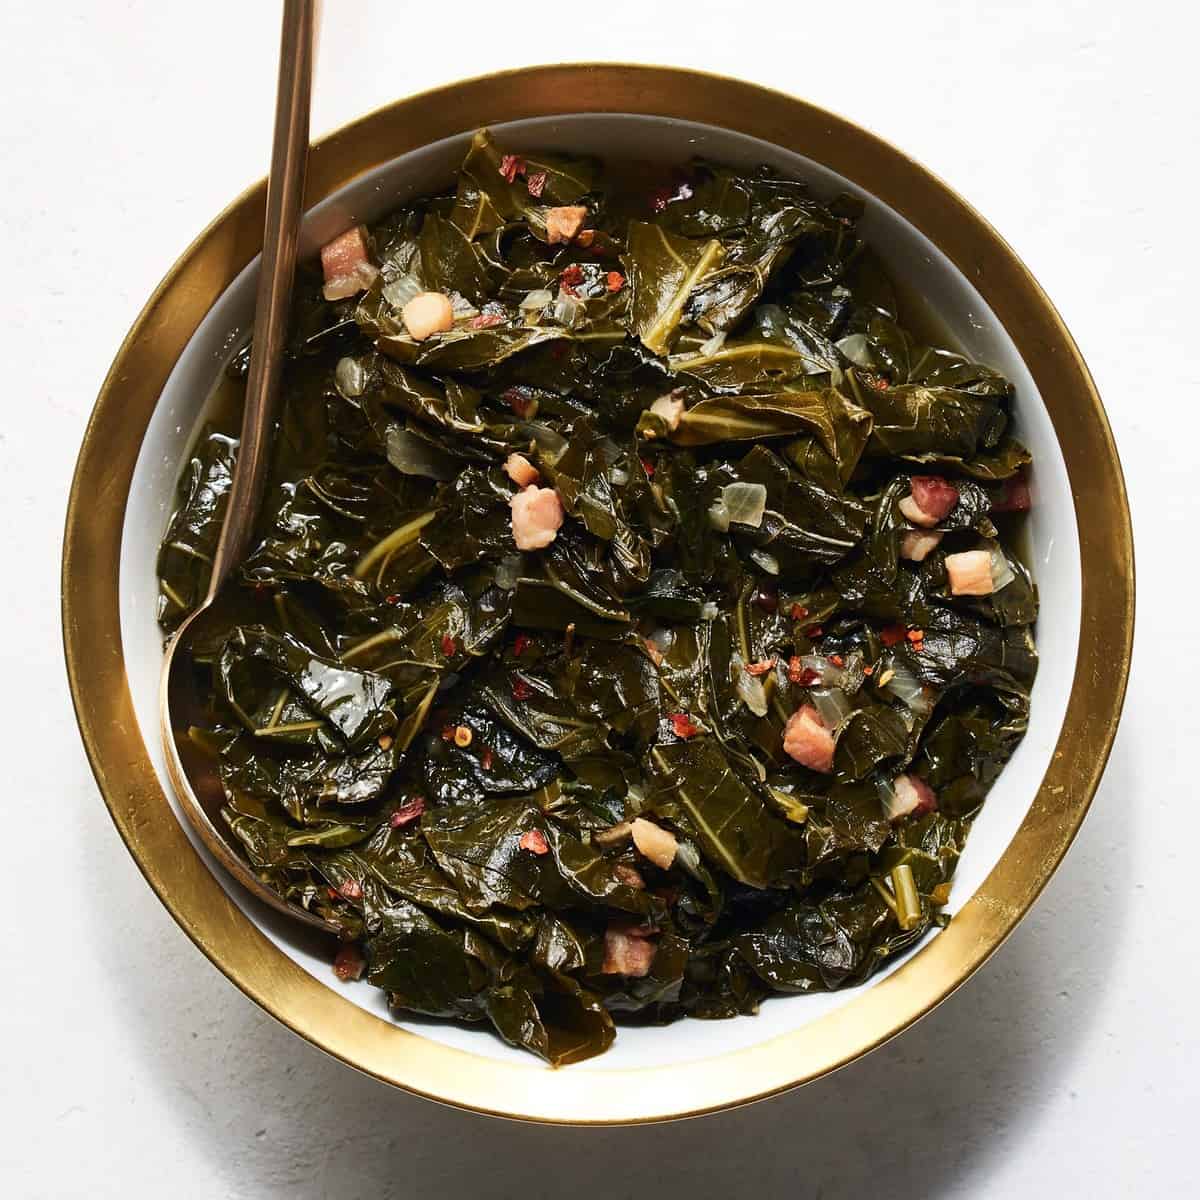  You won't find any meat in these vegetarian collard greens, but you'll still get all the flavor.